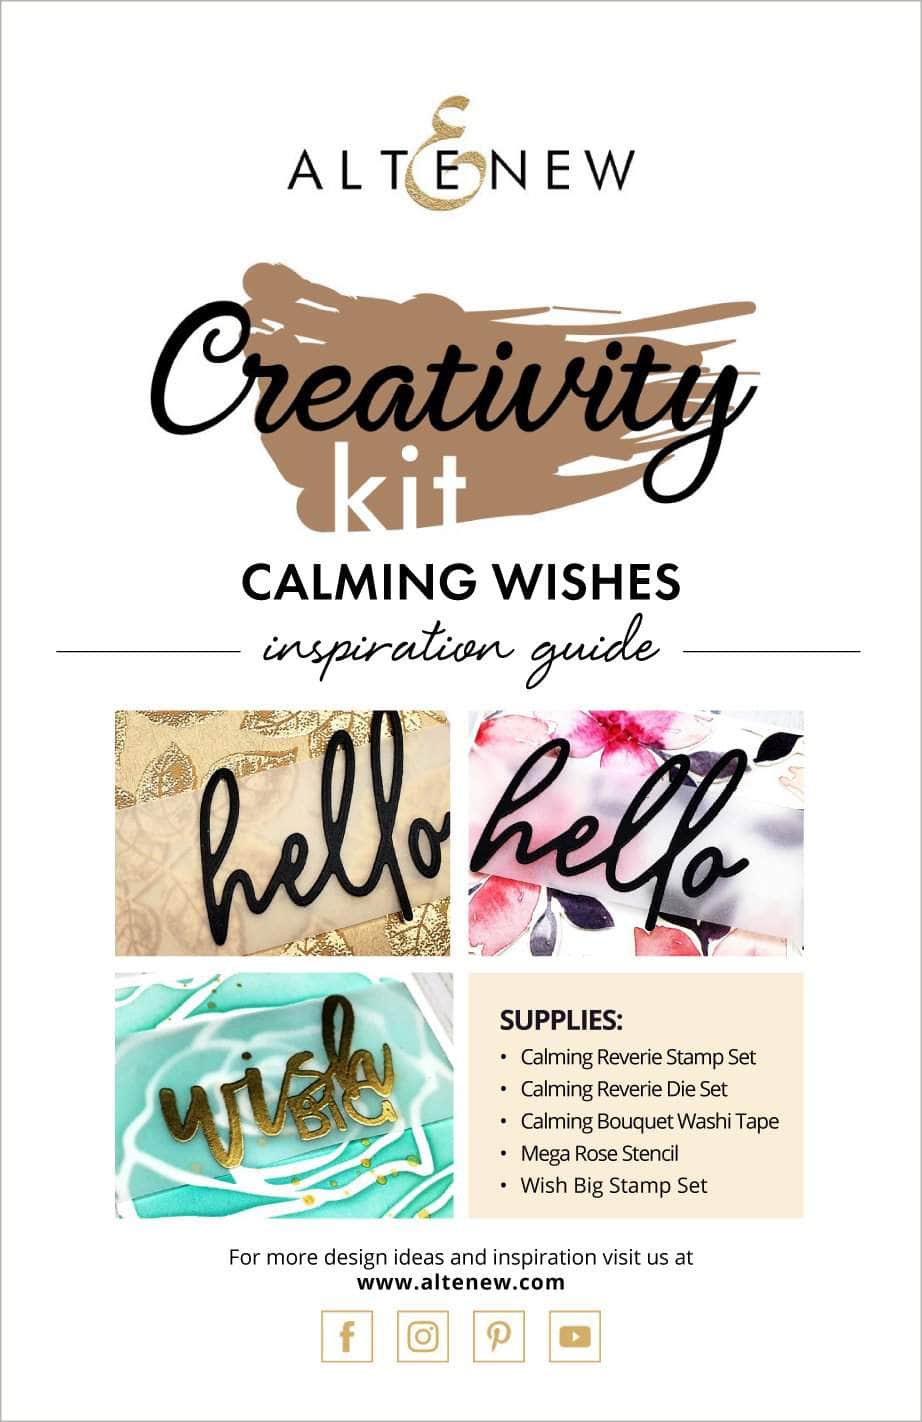 Printed Media Calming Wishes Creativity Kit Inspiration Guide